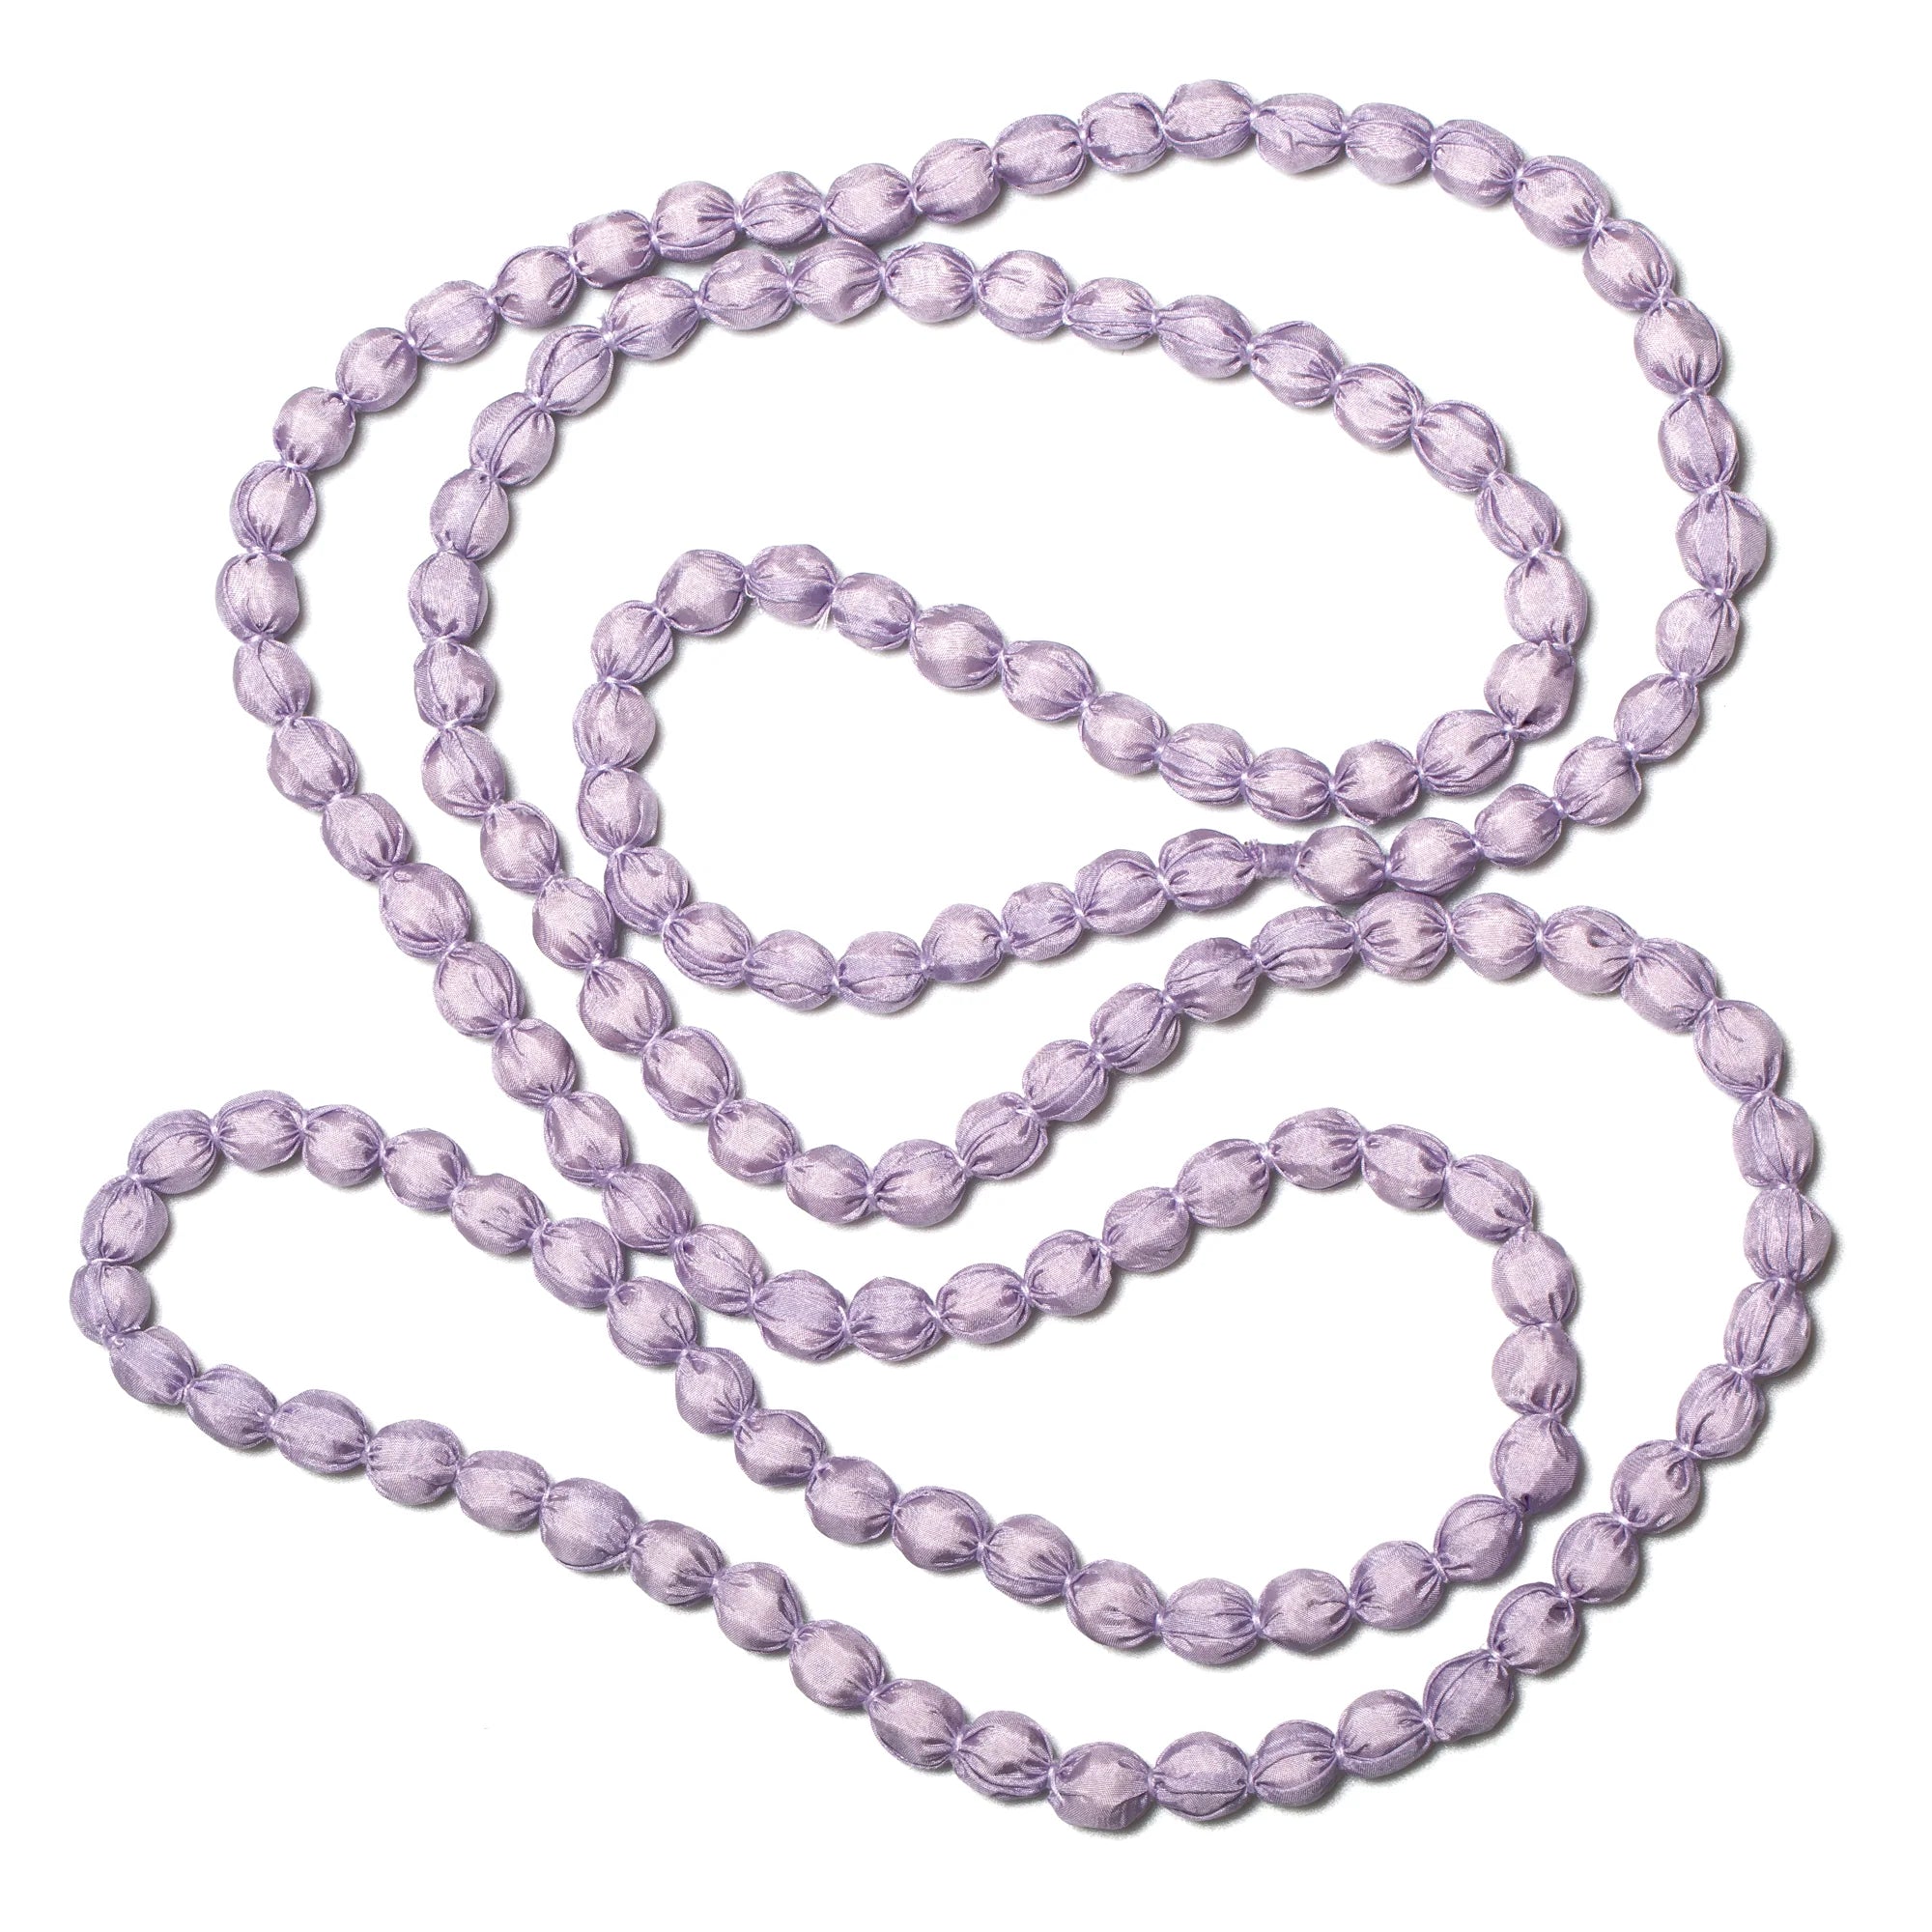 EXTRA LONG LILAC FABRIC BALL NECKLACE Suzie Blue Lilac 